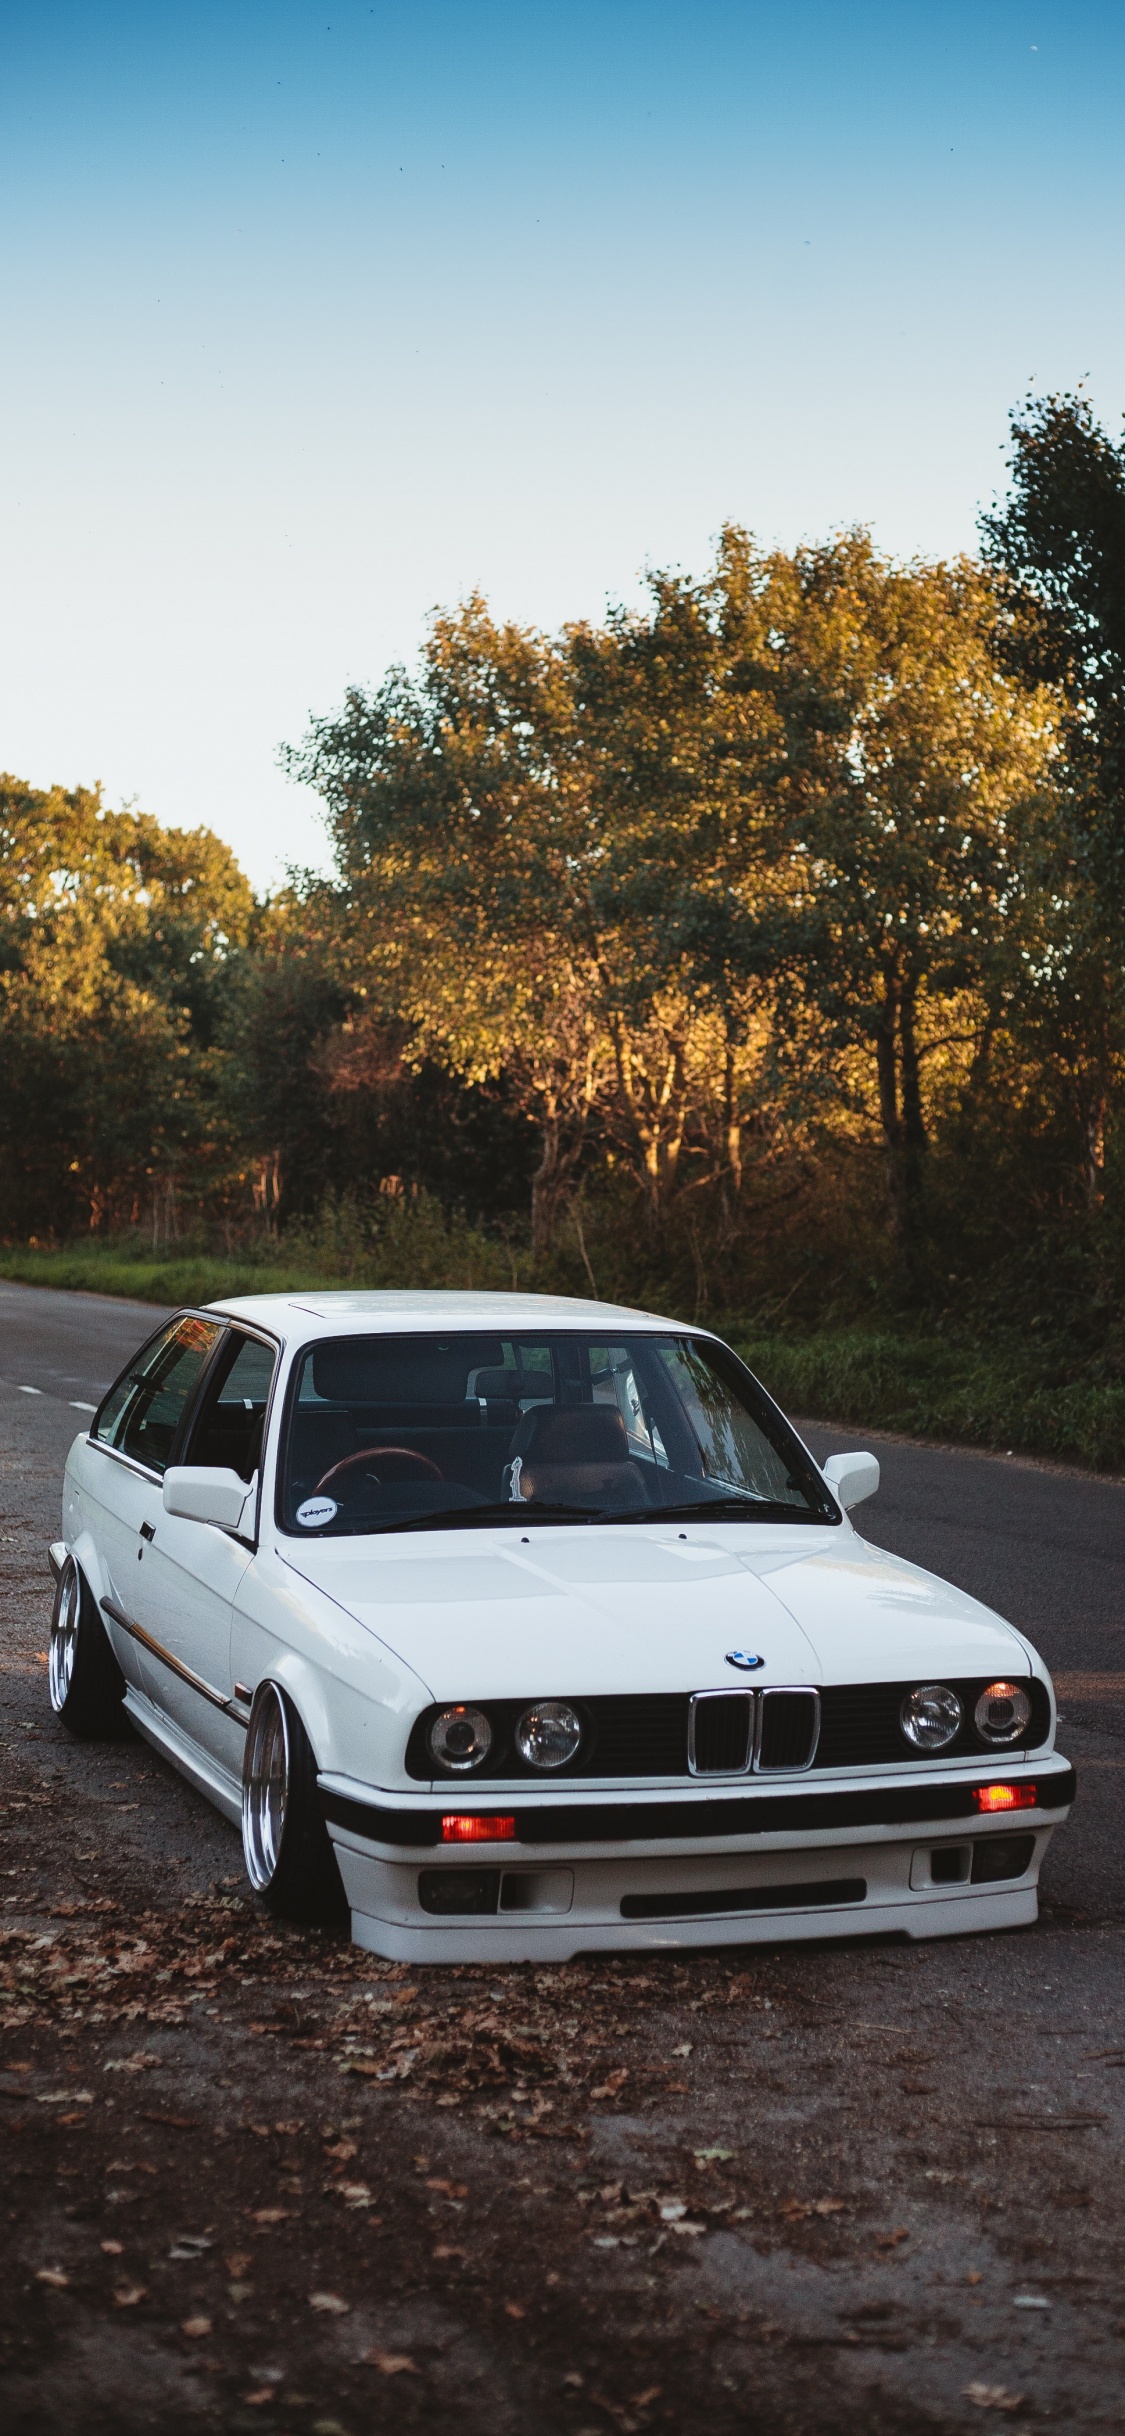 White Bmw m 3 on Road During Daytime. Wallpaper in 1125x2436 Resolution